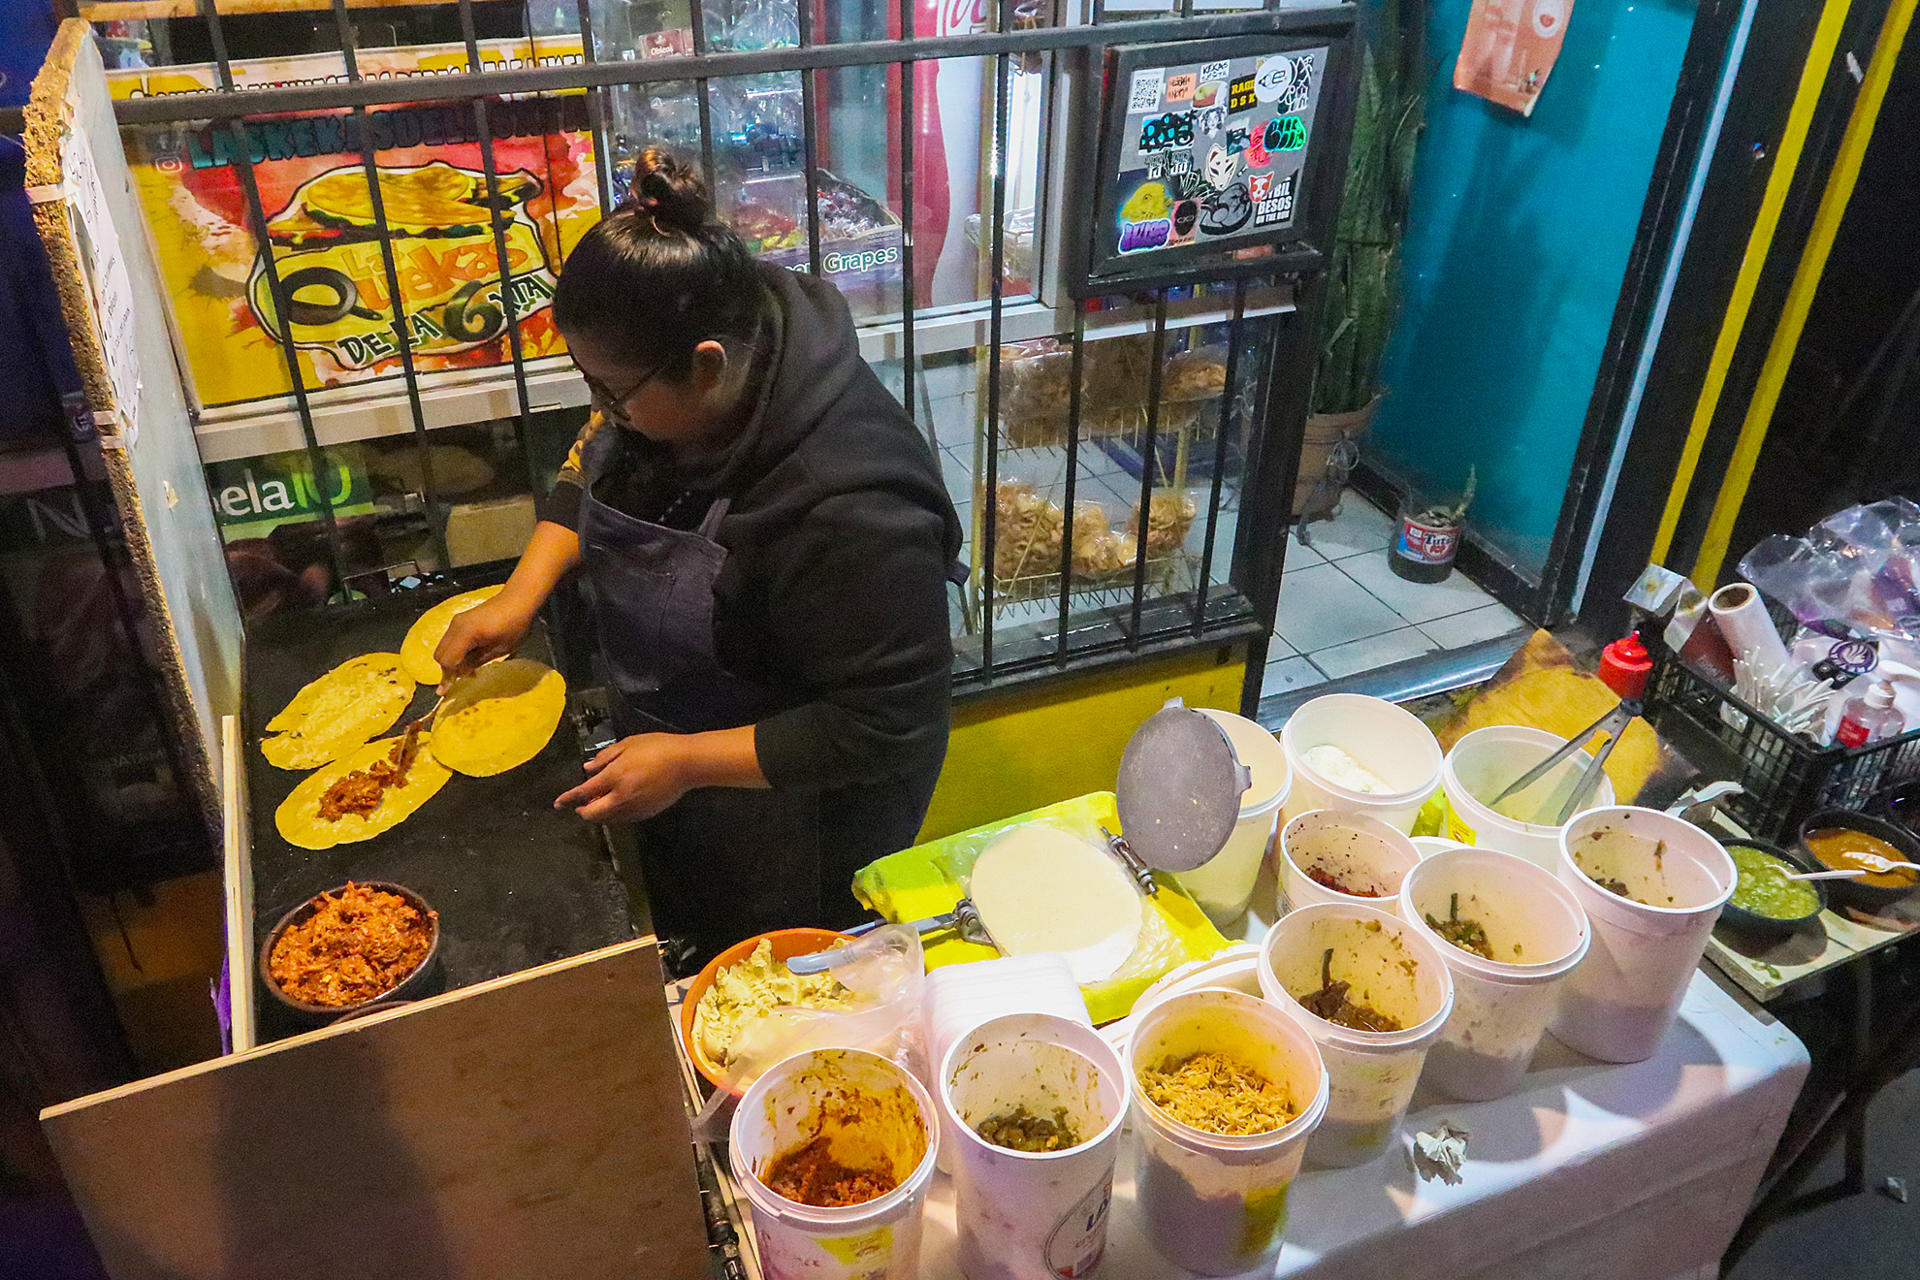 A woman prepares food at a stand in Tijuana, Mexico, on 28 February 2023. EFE/Joebeth Terriquez